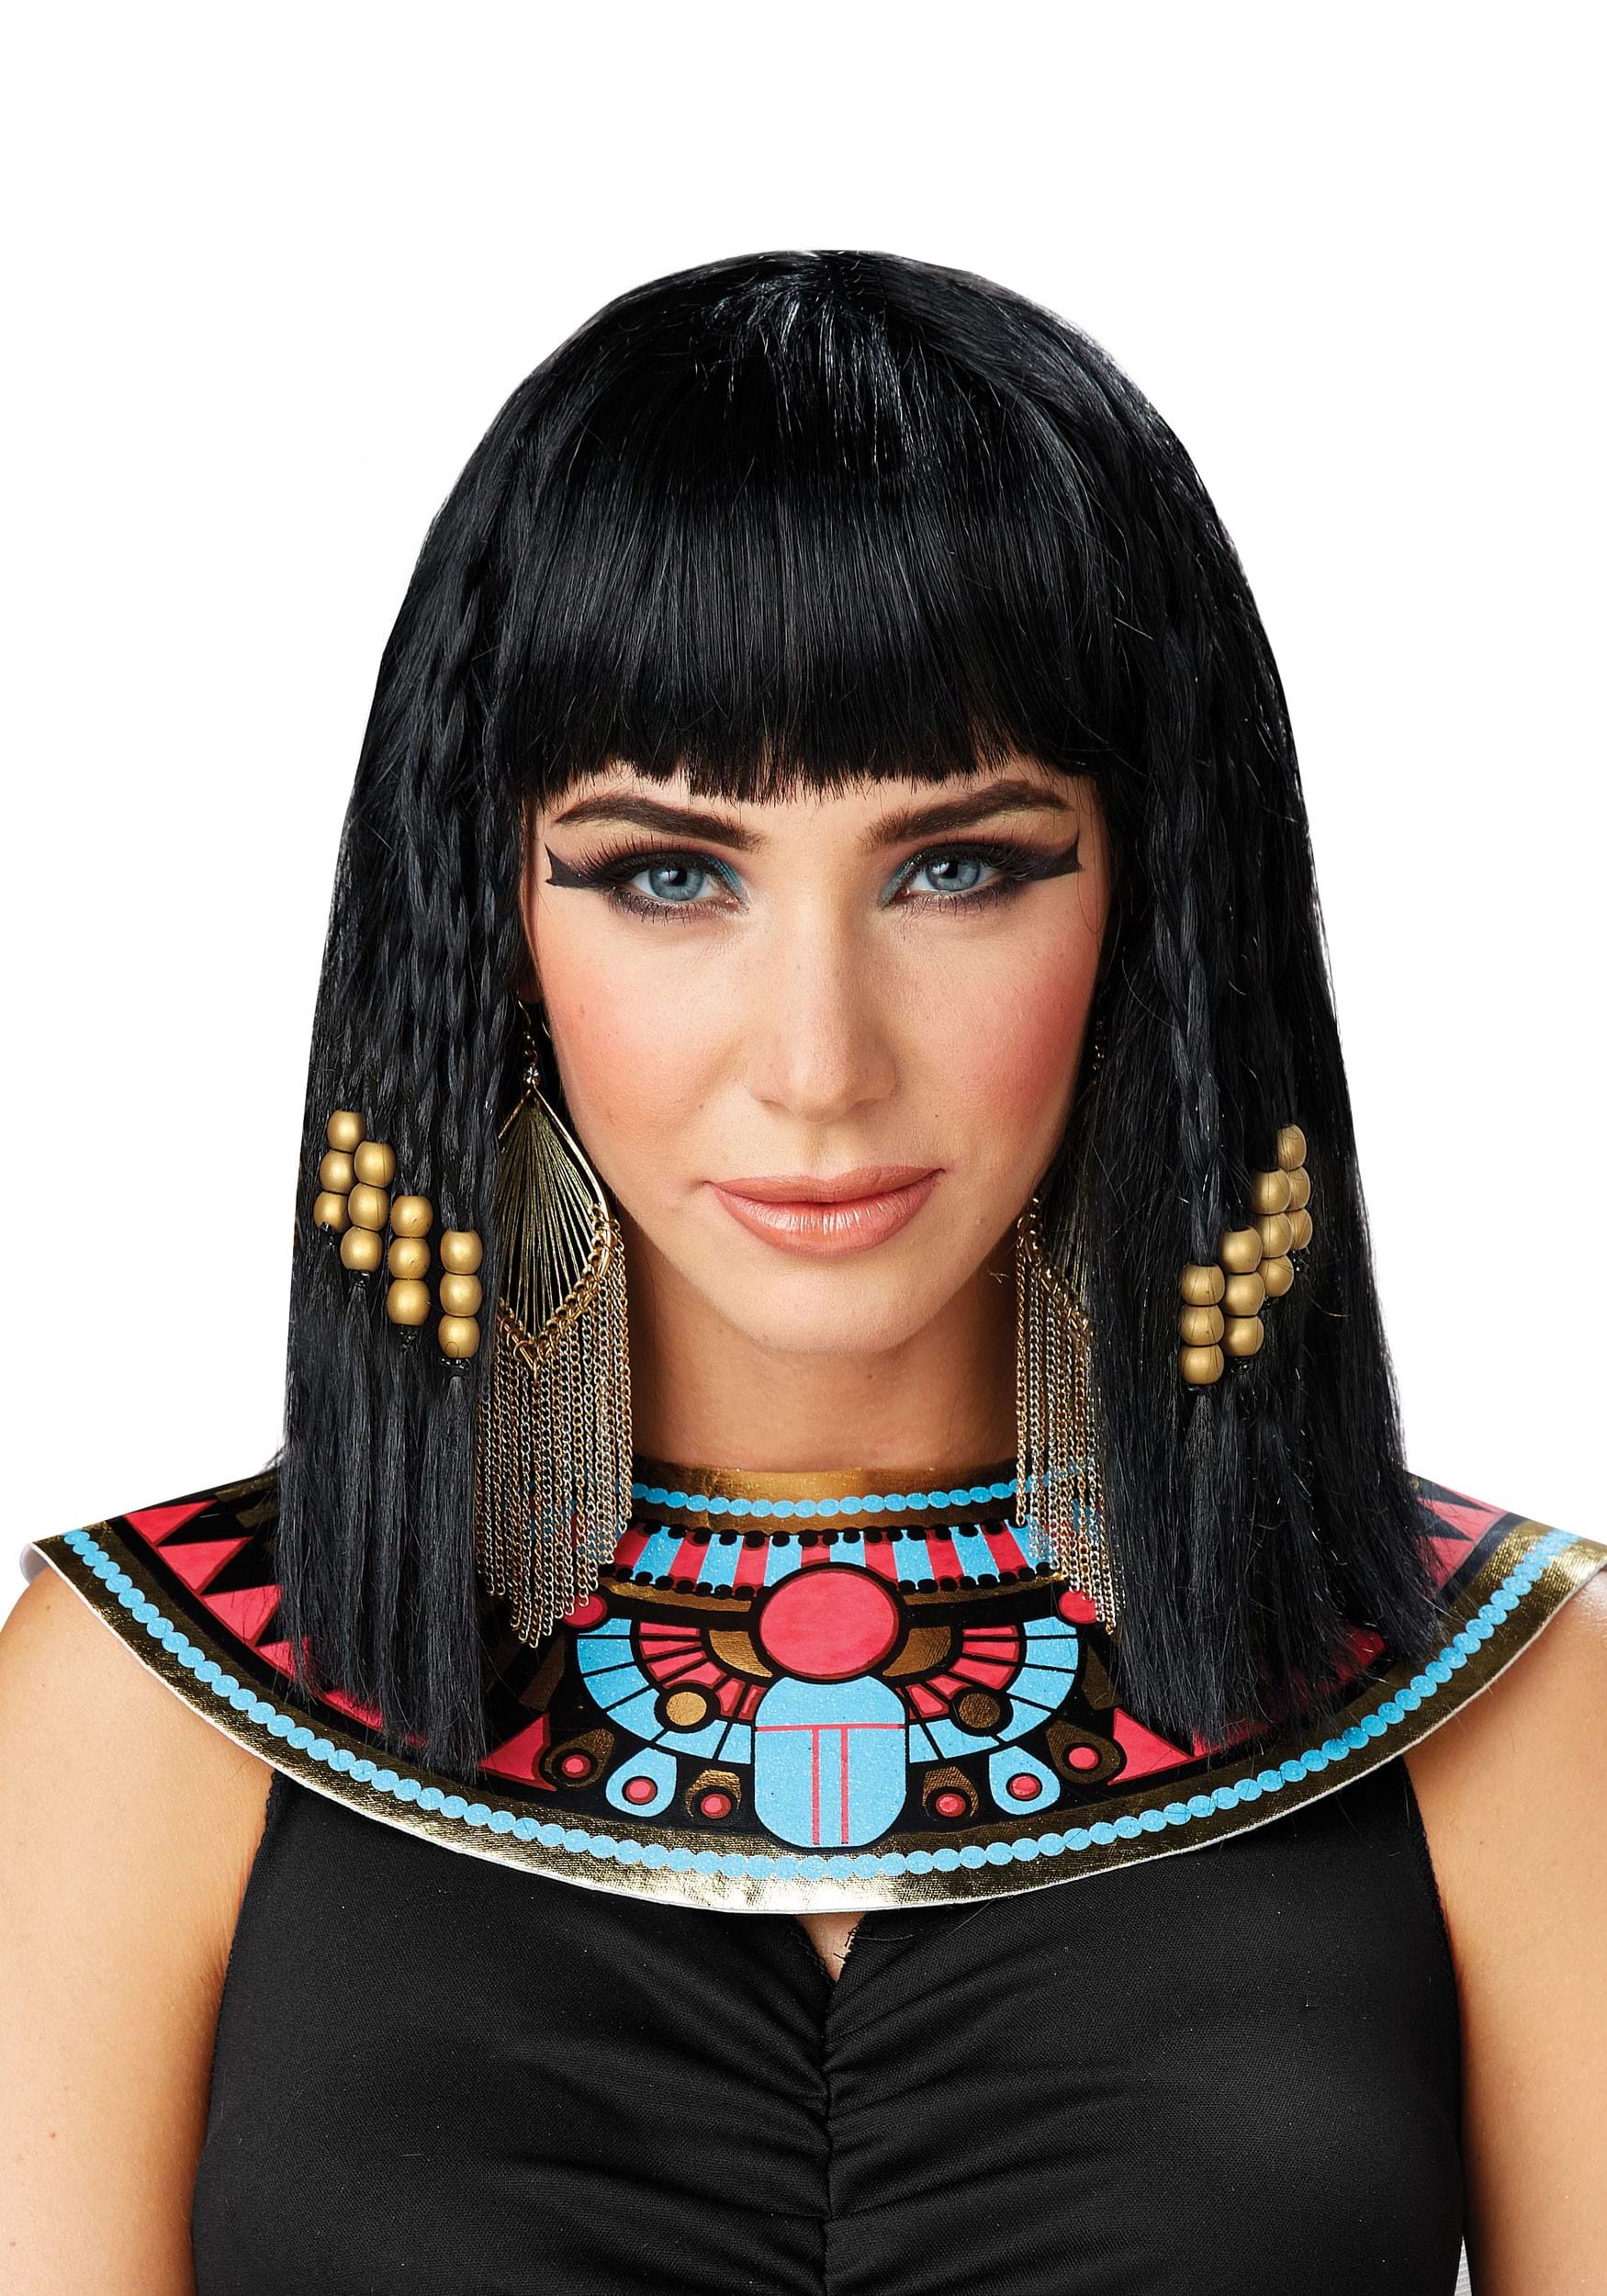 1 Piece Amscan 840835 Black Cleopatra Wig with Gold Sequin Headpiece 